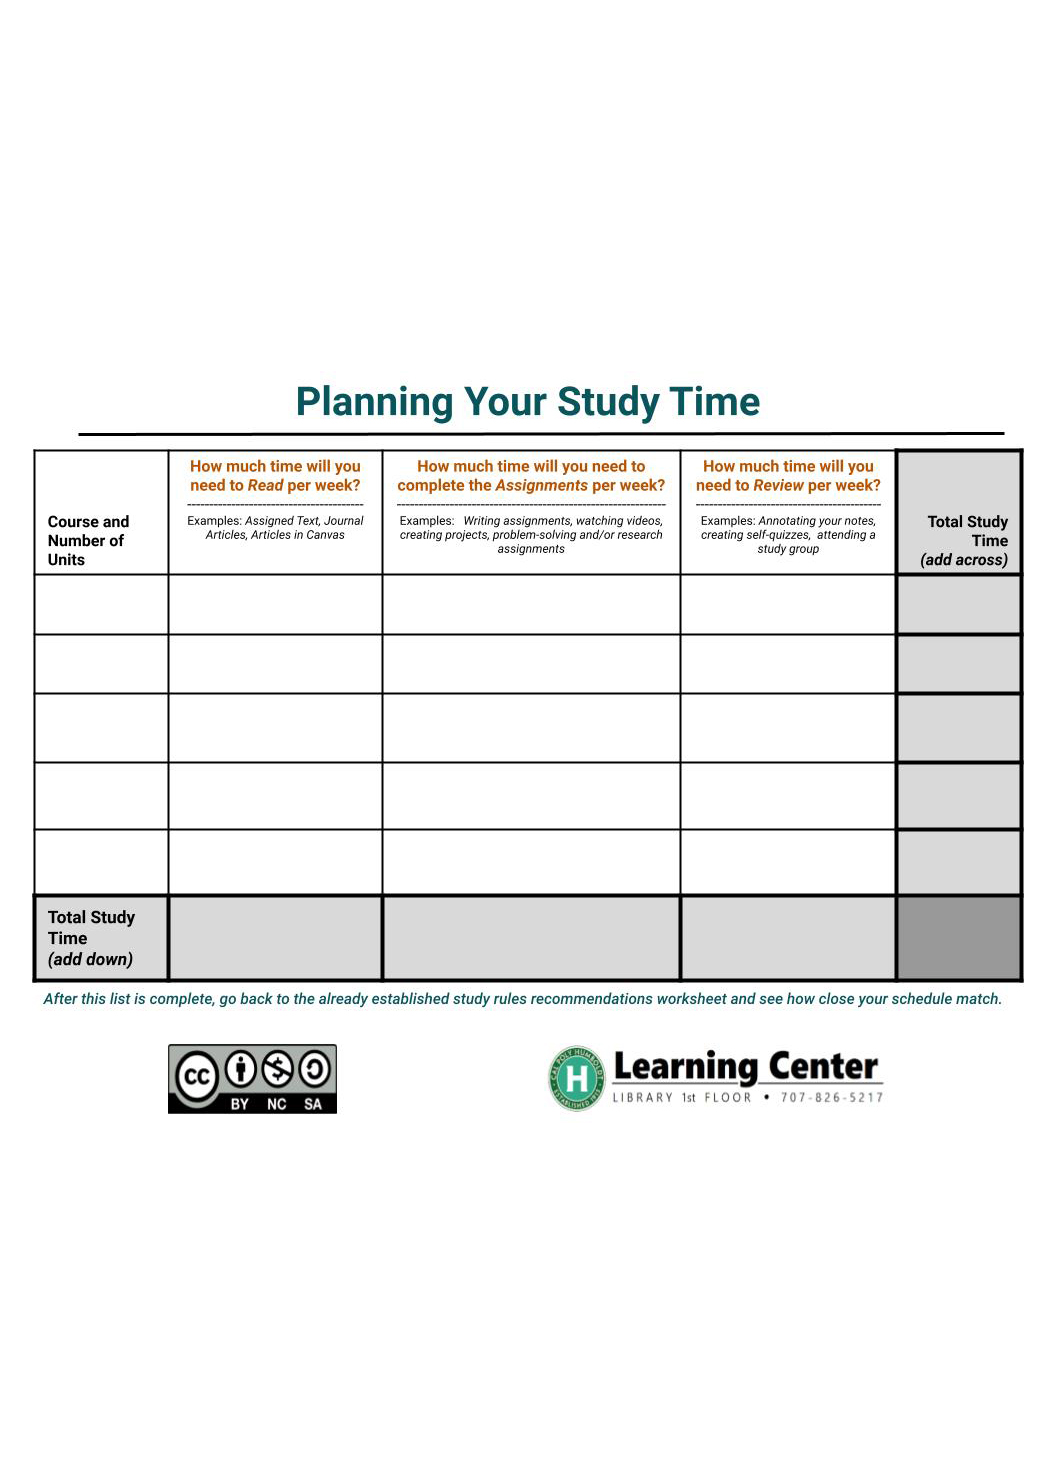 Planning Your Study Time